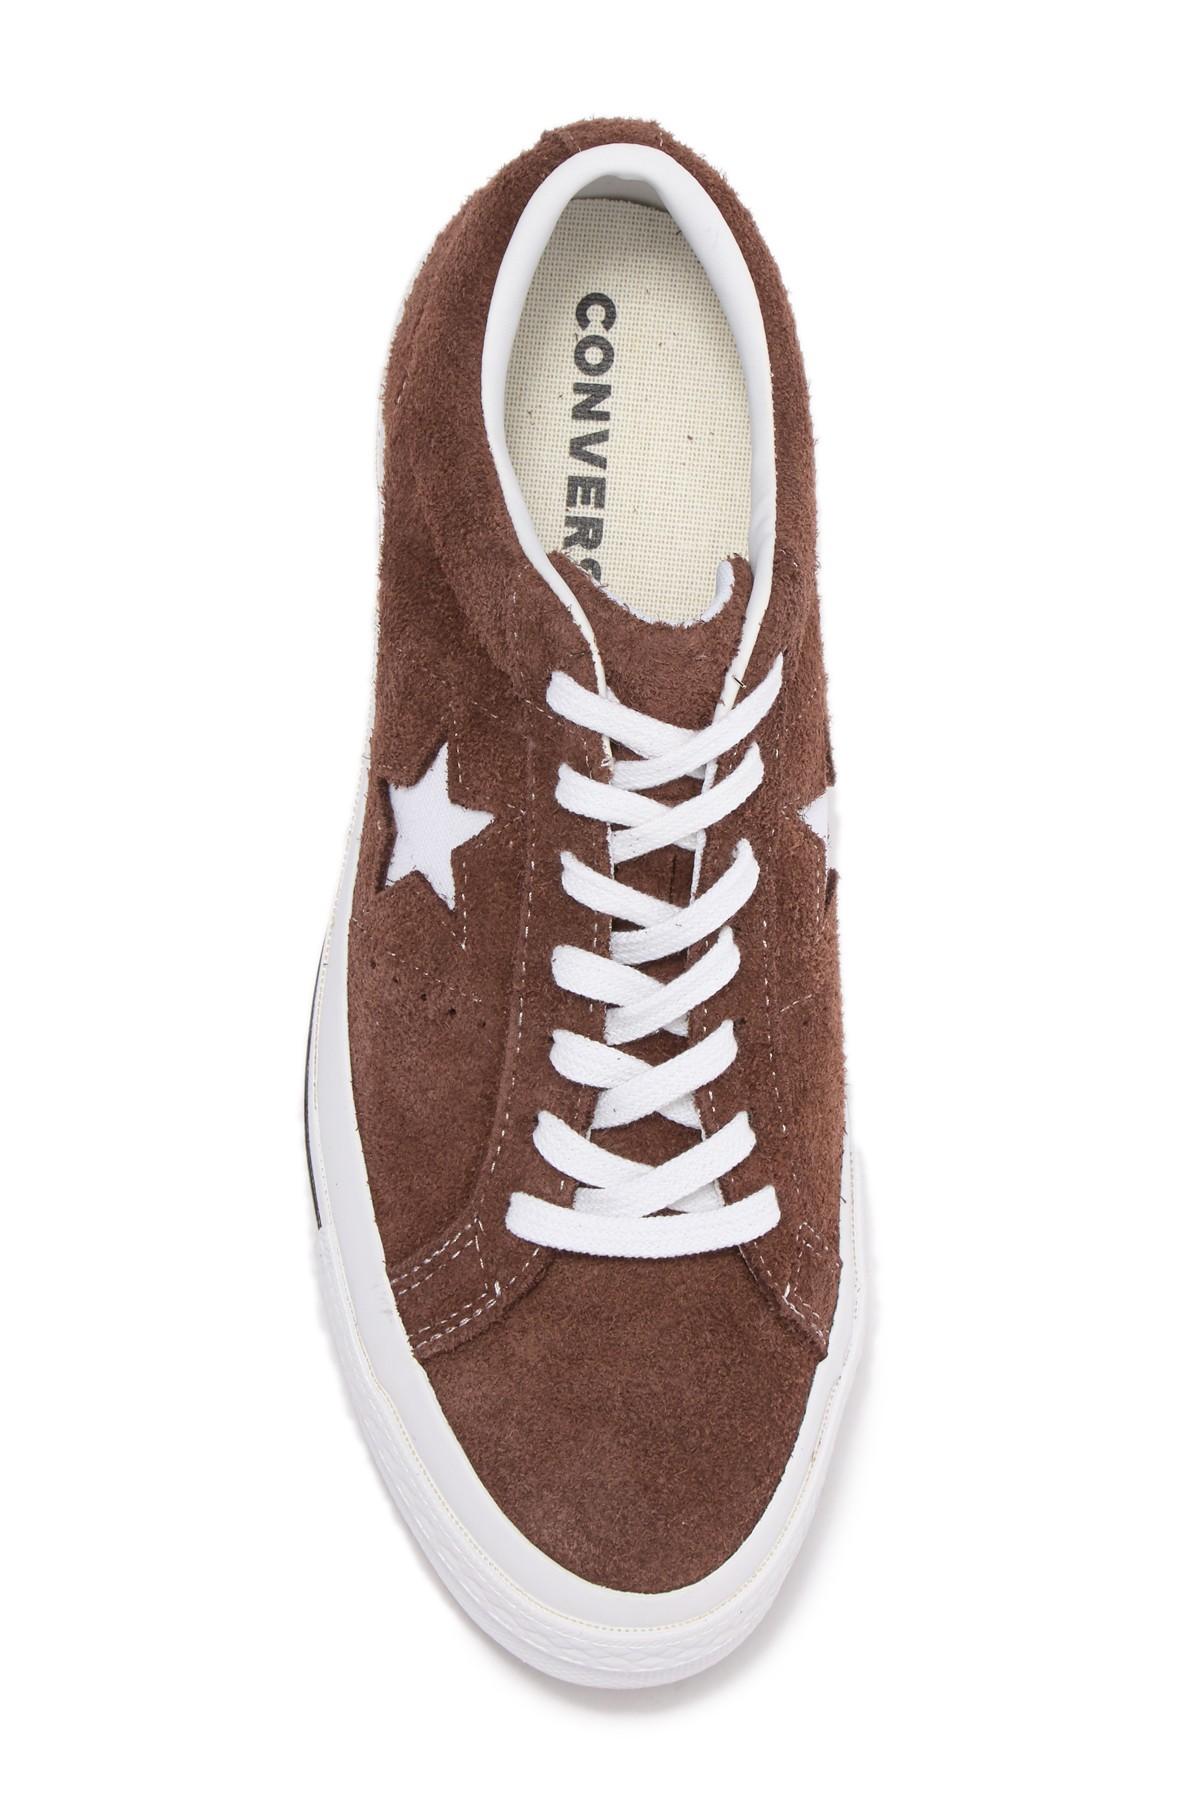 Converse One Star Oxford Suede Sneaker (unisex) in Chocolate/White (Brown)  for Men - Lyst